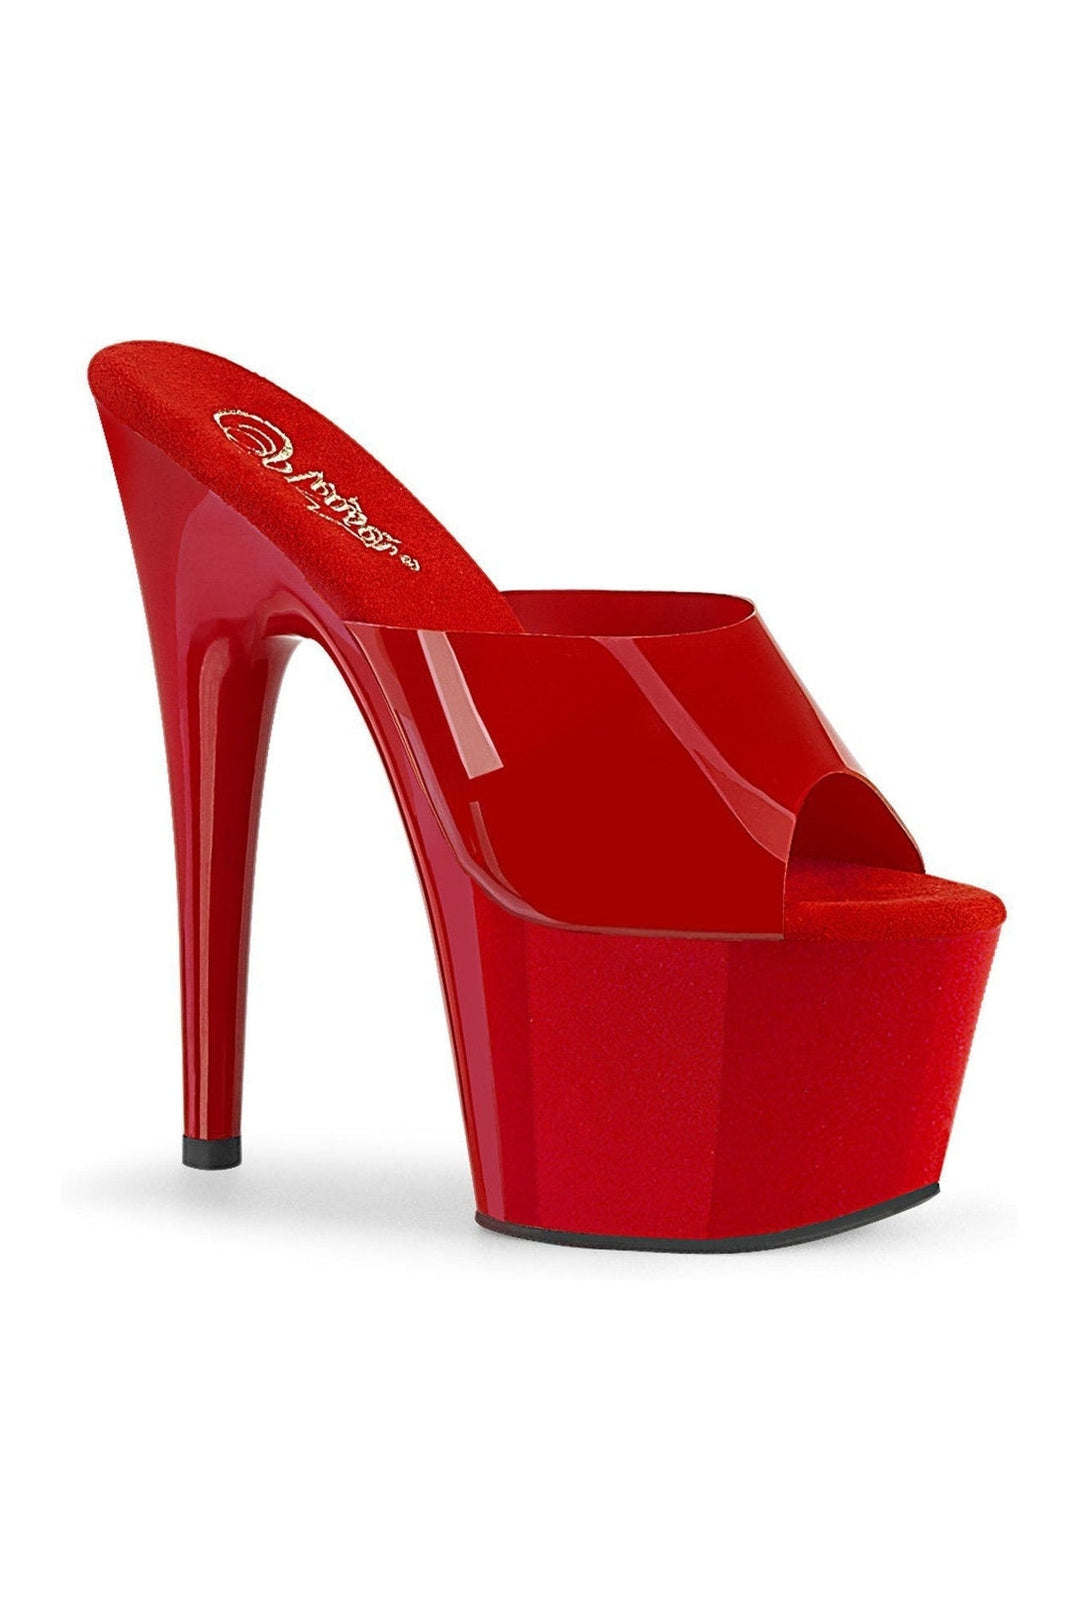 ADORE-701N Stripper Slide | Red Faux Leather-Slides-Pleaser-Red-11-Faux Leather-SEXYSHOES.COM